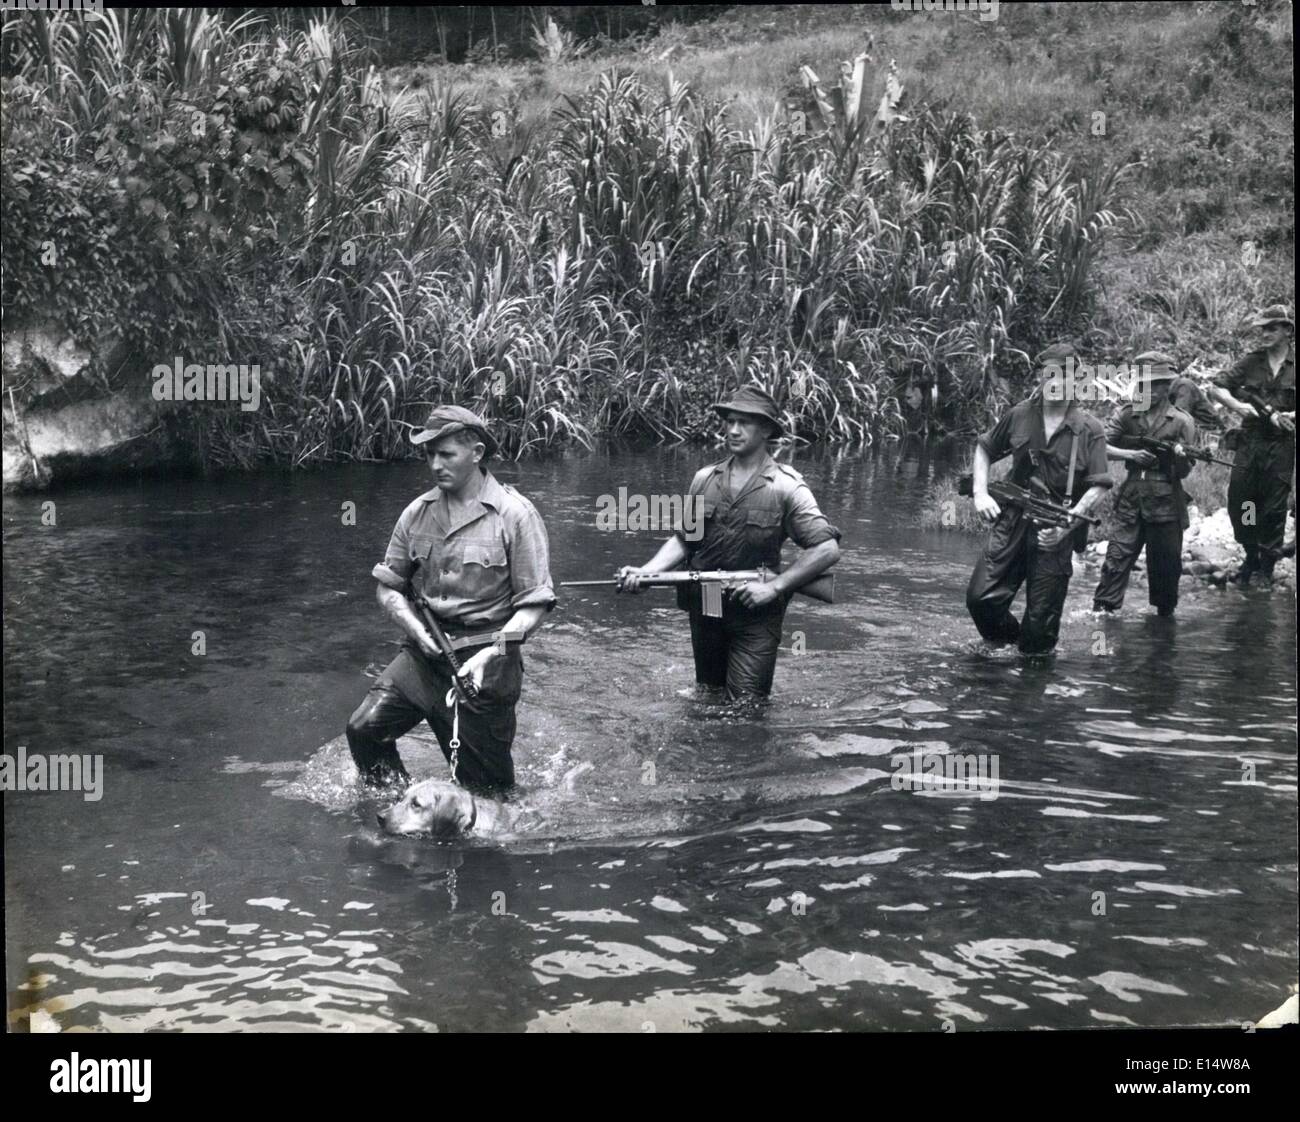 Apr. 18, 2012 - A Dog leads a Malaya jungle patrol: Trooper Des Brady, with 'Daks' on a leash, ler the patrol up the river. He will give the alarm, using his sense of smell and hearing, before the soldiers. Stock Photo